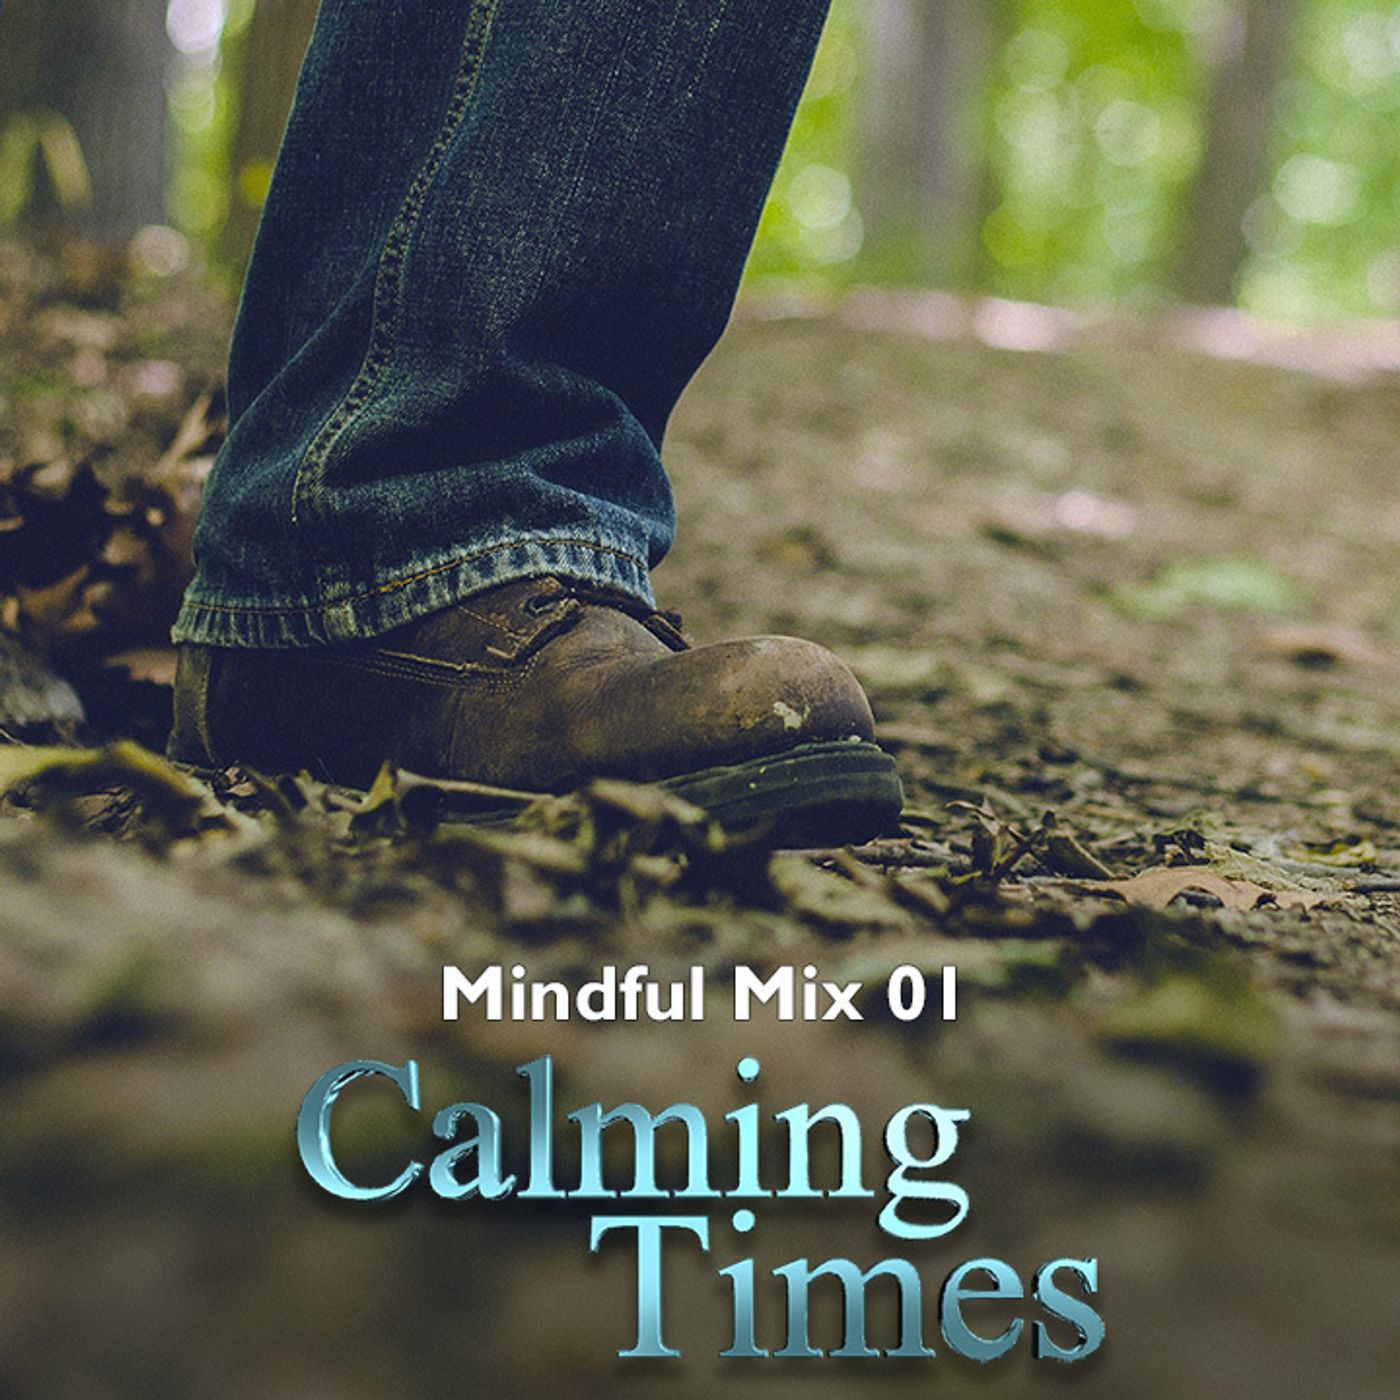 Mindful Mix 01 from Calming Times